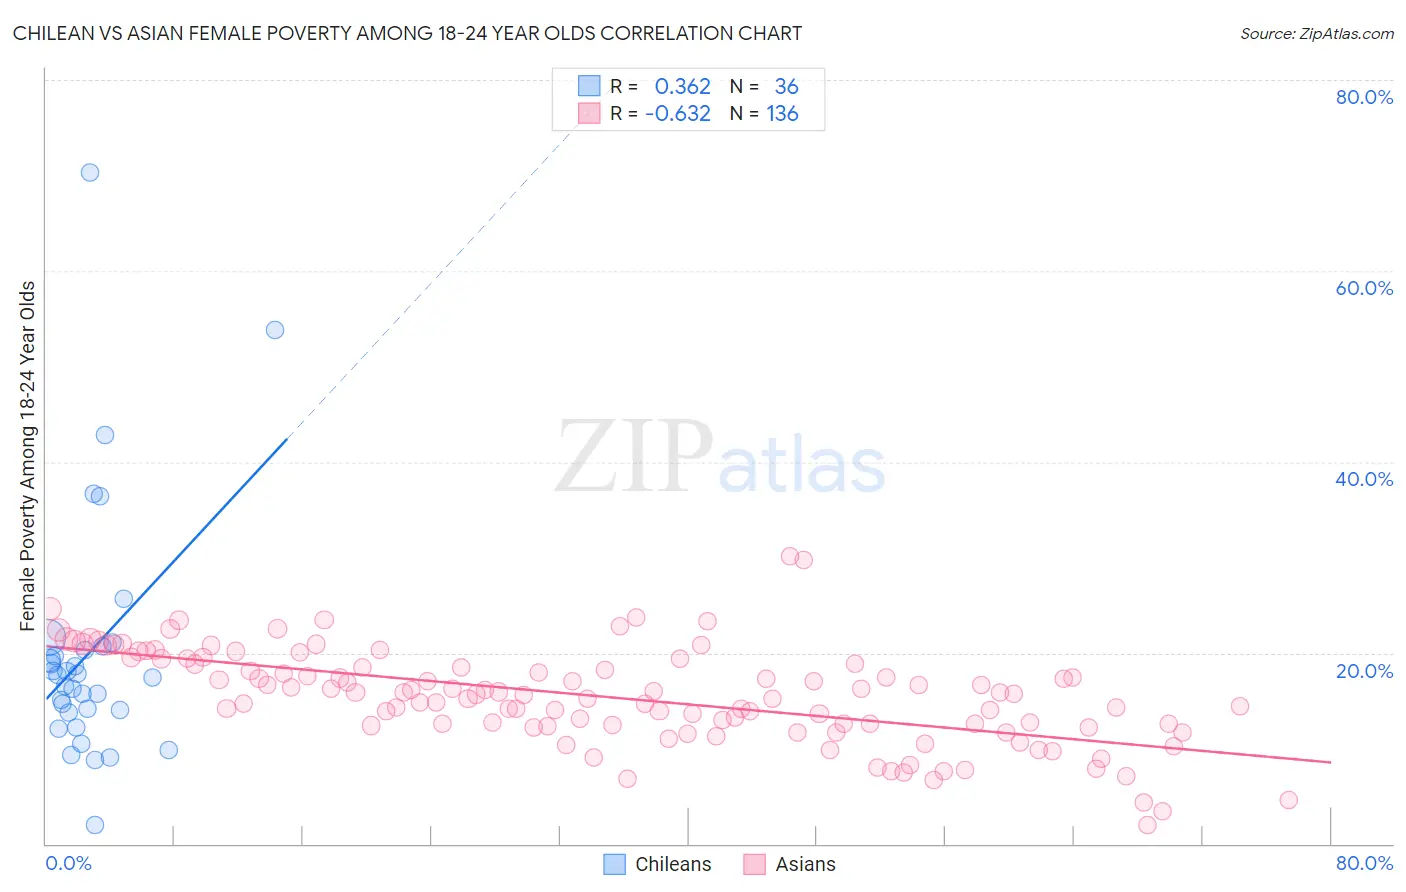 Chilean vs Asian Female Poverty Among 18-24 Year Olds